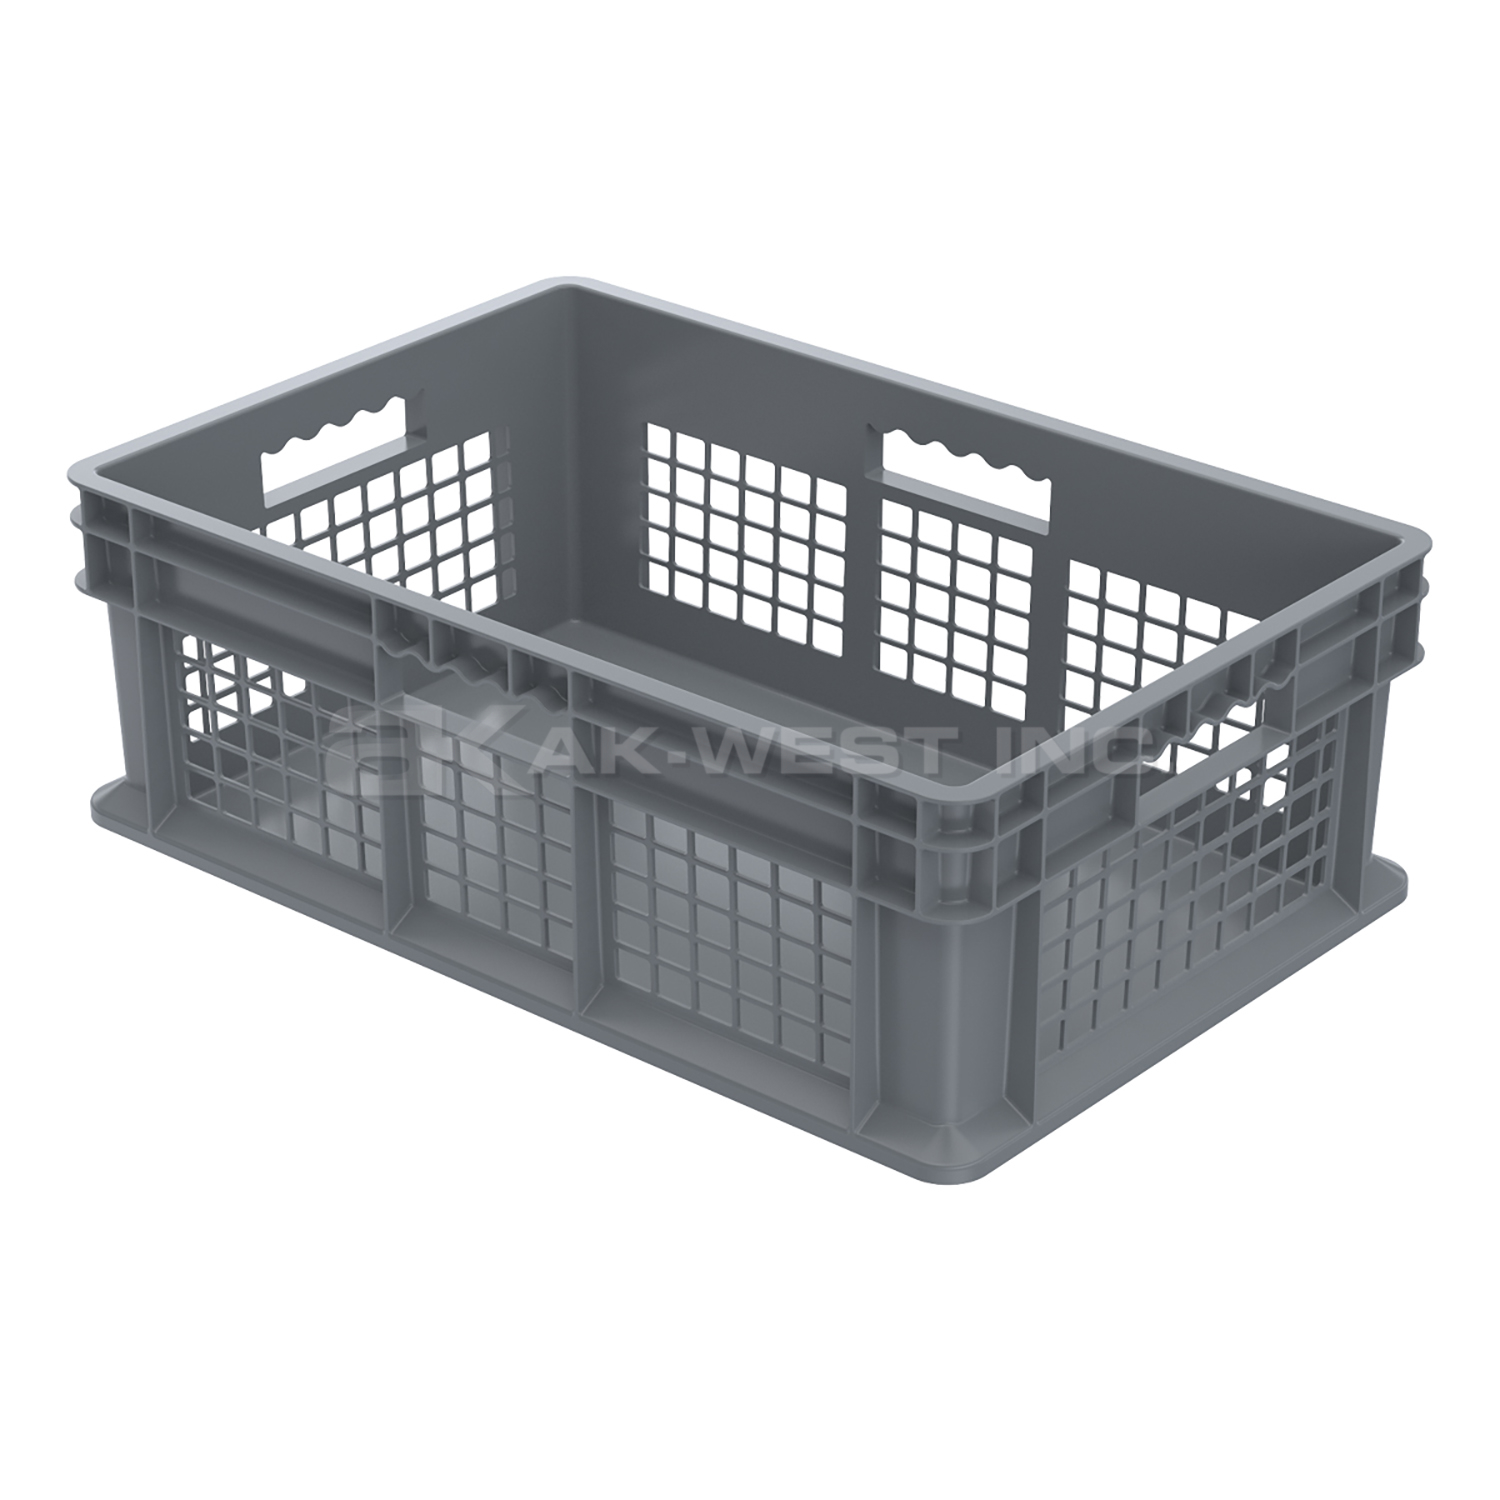 Grey, 23-3/4" x 15-3/4" x 8-1/4", Vented Side/Solid Base, Straight Wall Container (4 Per Carton)